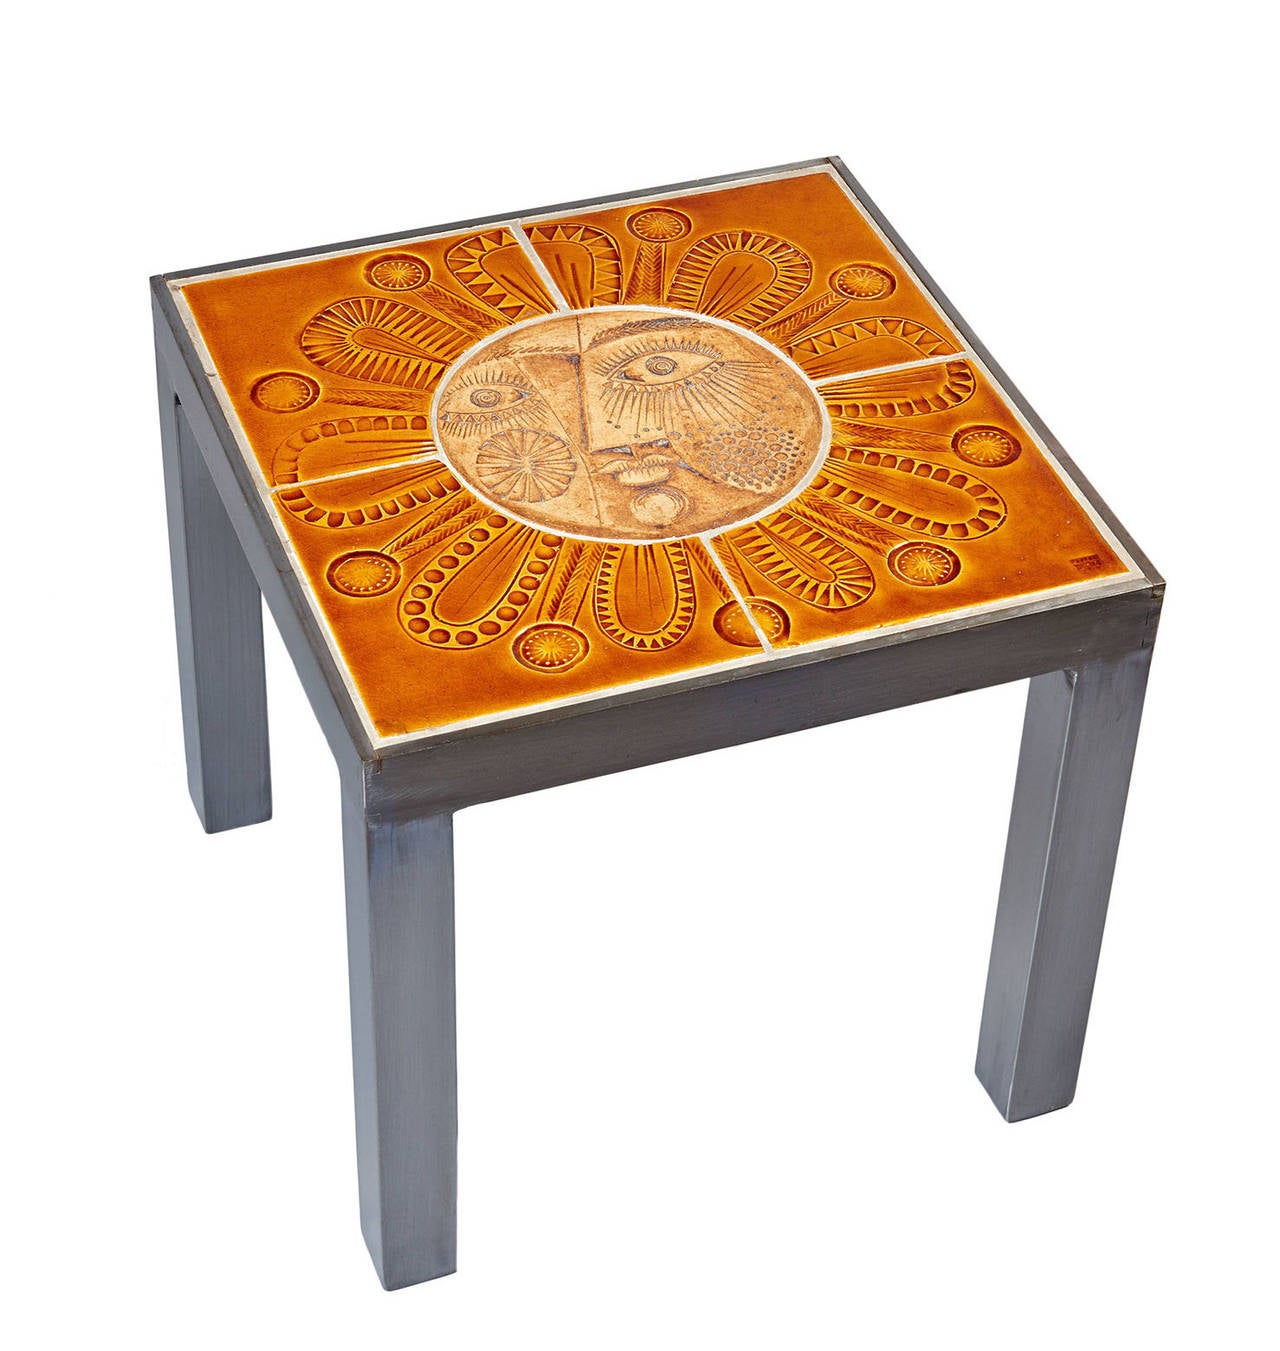 Made during the early 1970s, when the two great Vallauris ceramics returned to collaboration. The table's ceramic top comprises five panels, with impressed decoration. The central panel, a roundel depicting the stylized face of the sun, is unglazed;